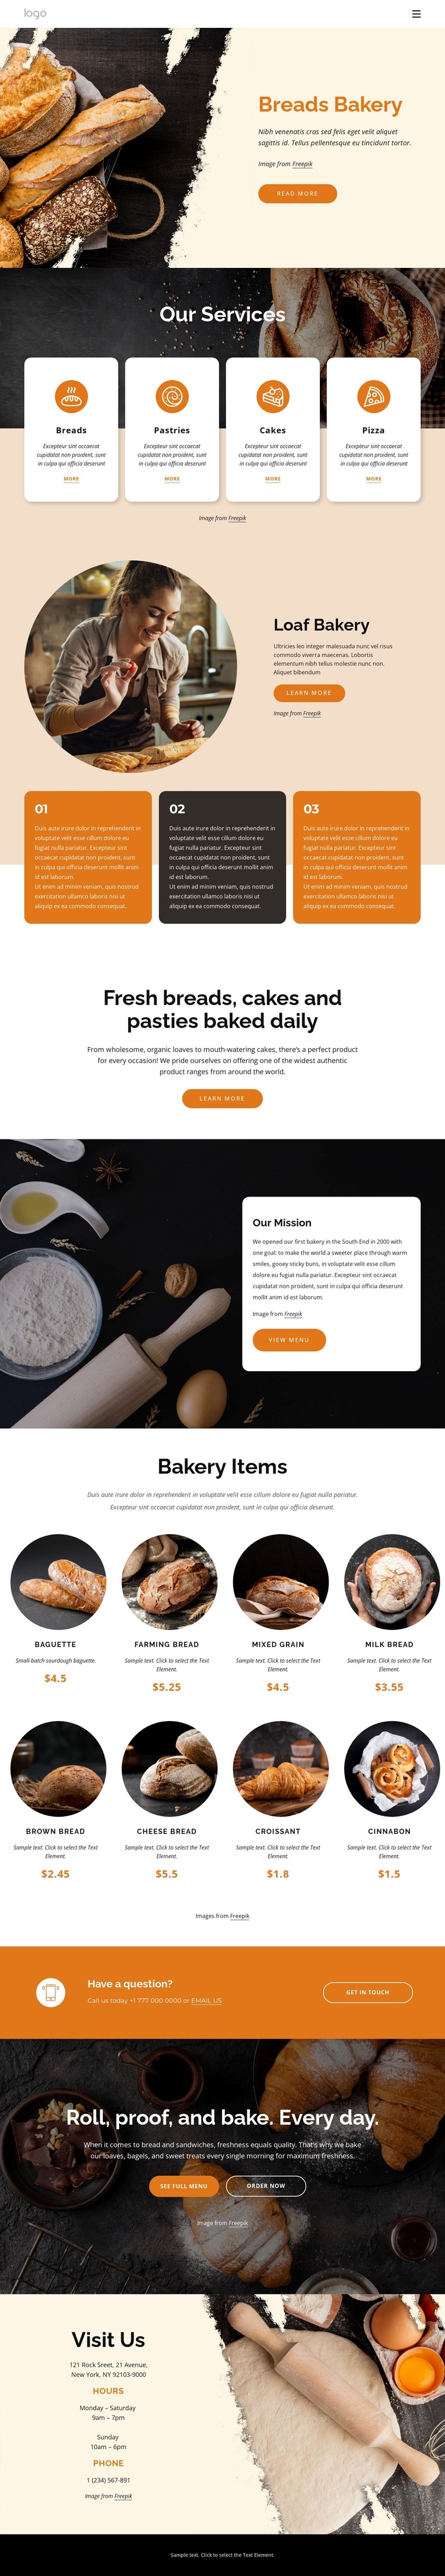 Breads bakery Template